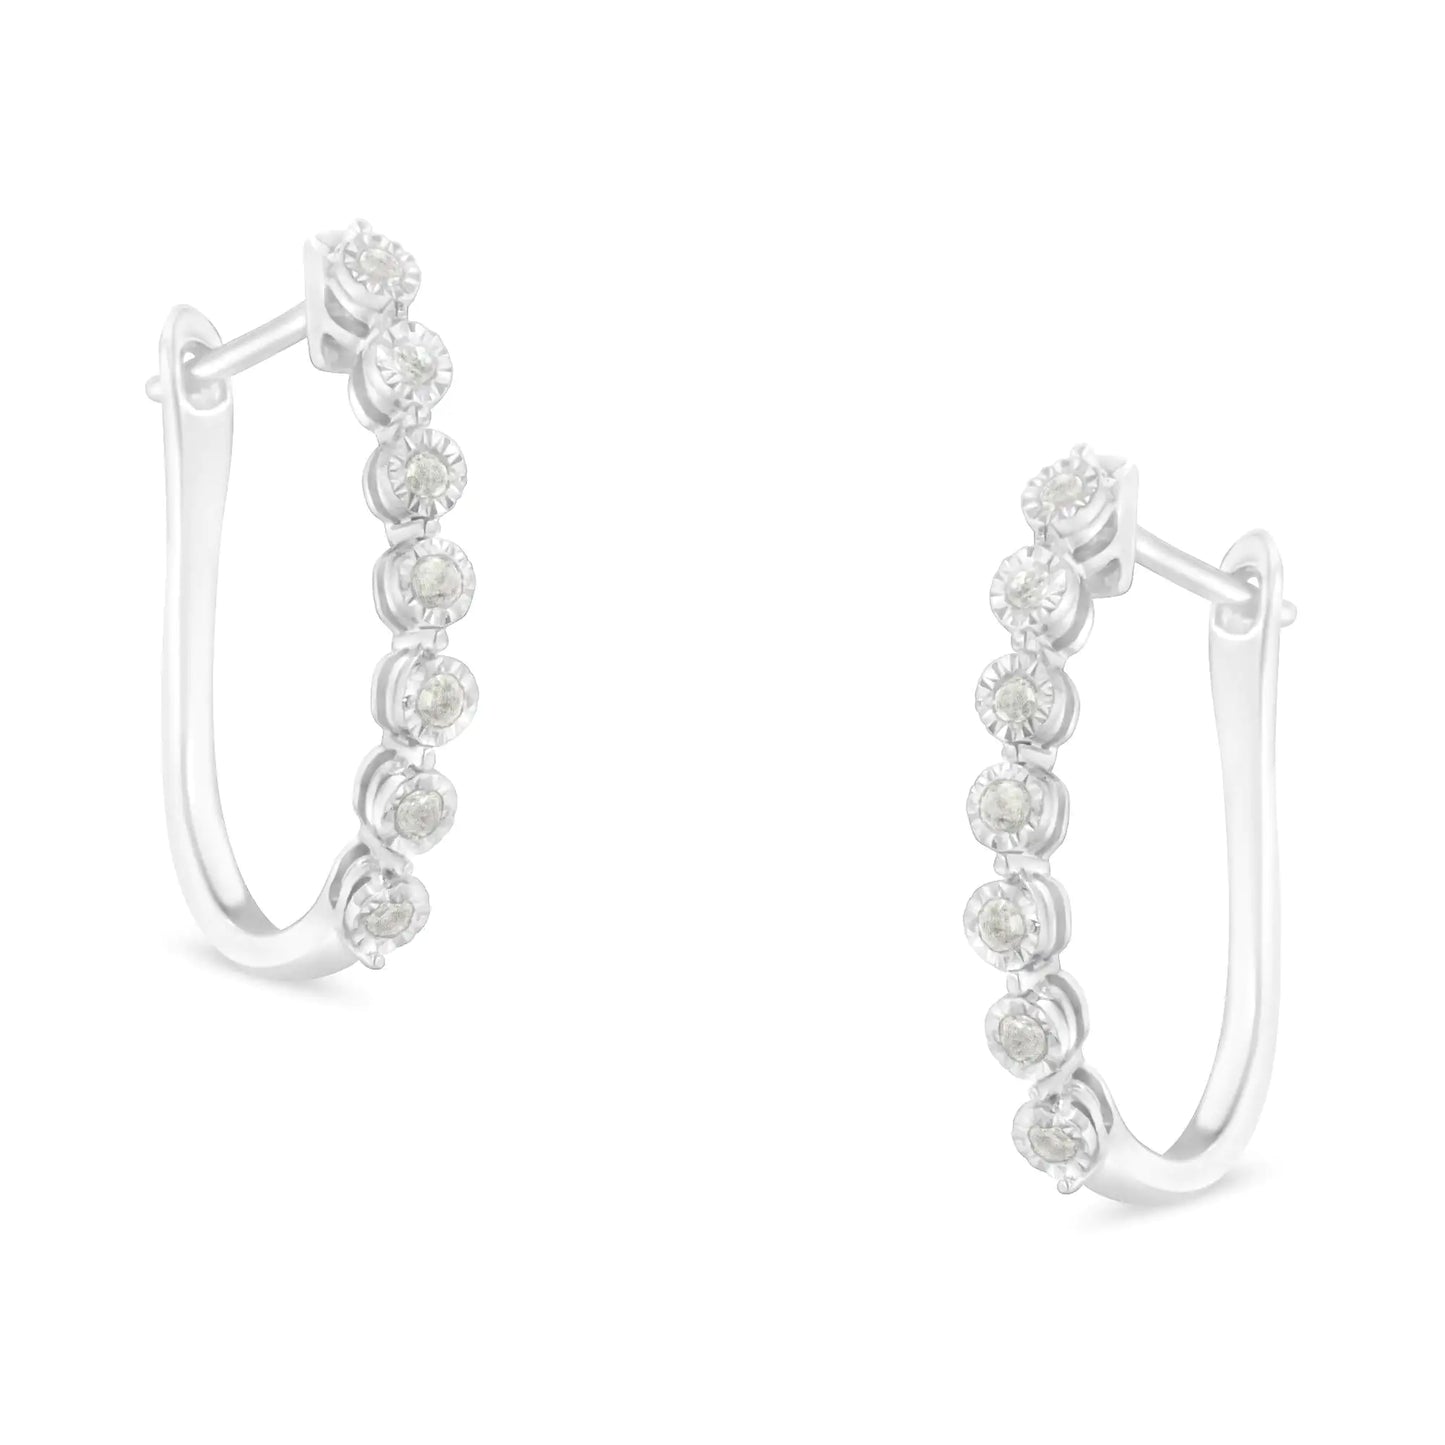 .925 Sterling Silver 1/2 cttw Miracle-Set Diamond 7 Stone Hoop Earrings (I-J Color, I3 Clarity)